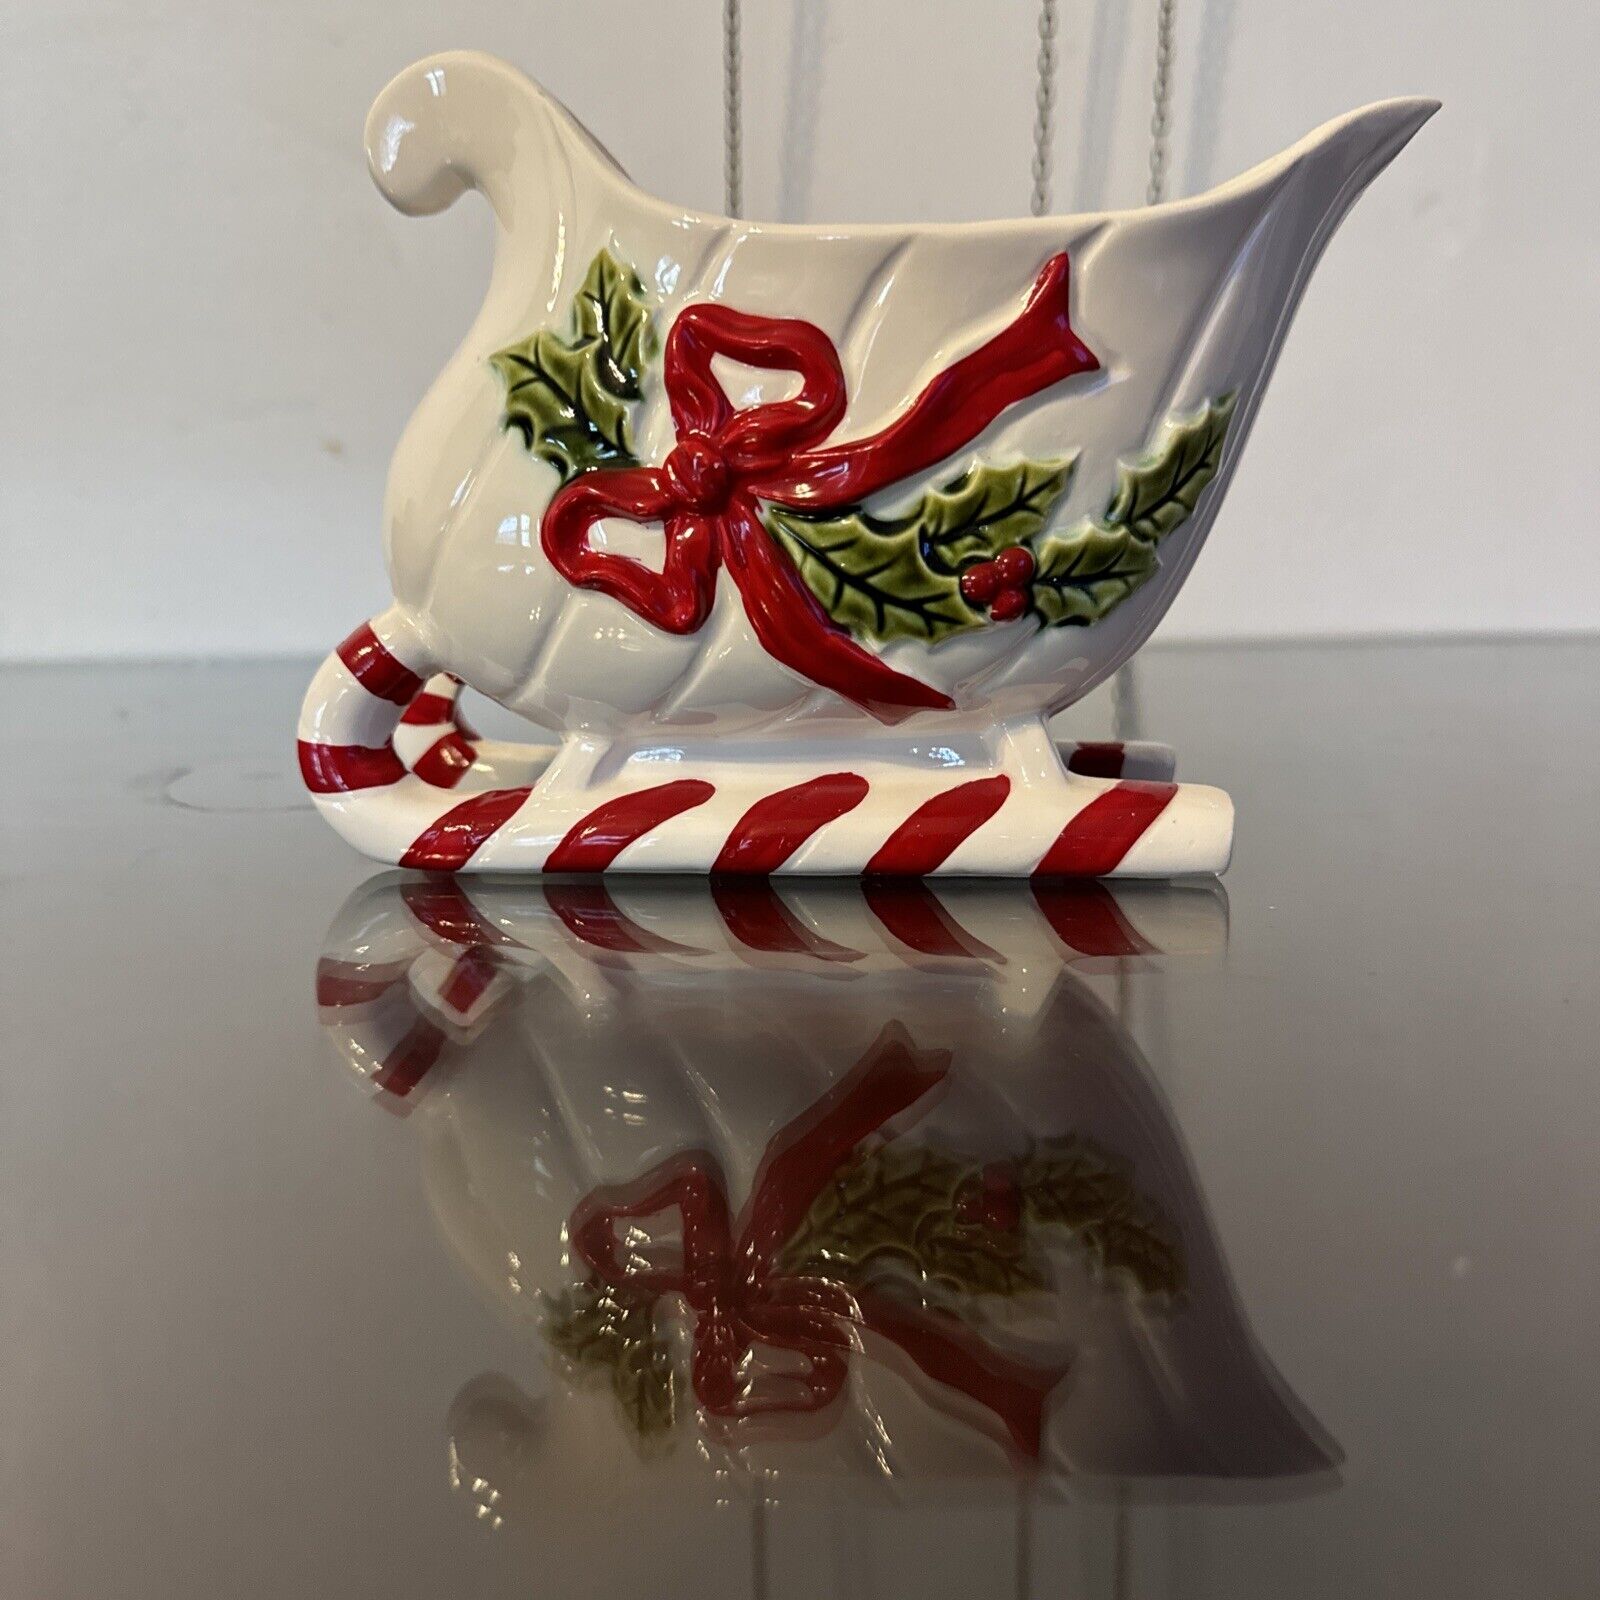 Vtg Mcm Brinns Christmas Sleigh Candy Holder With Candy Cane Stripes Pristine 